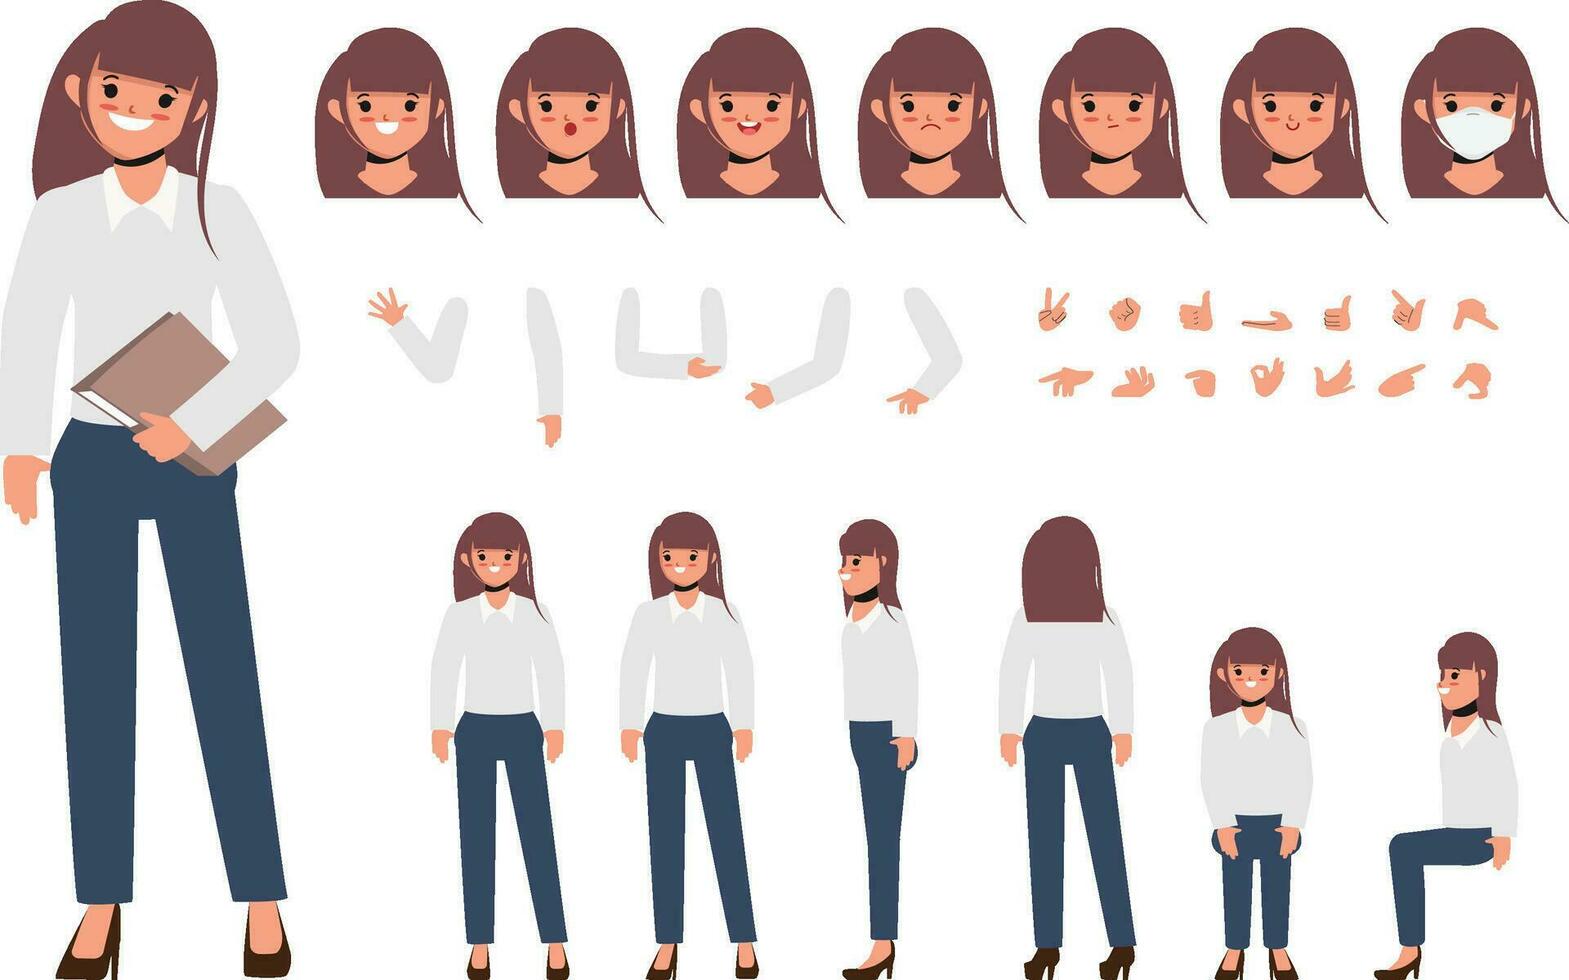 Female Character illustration with separate body parts vector